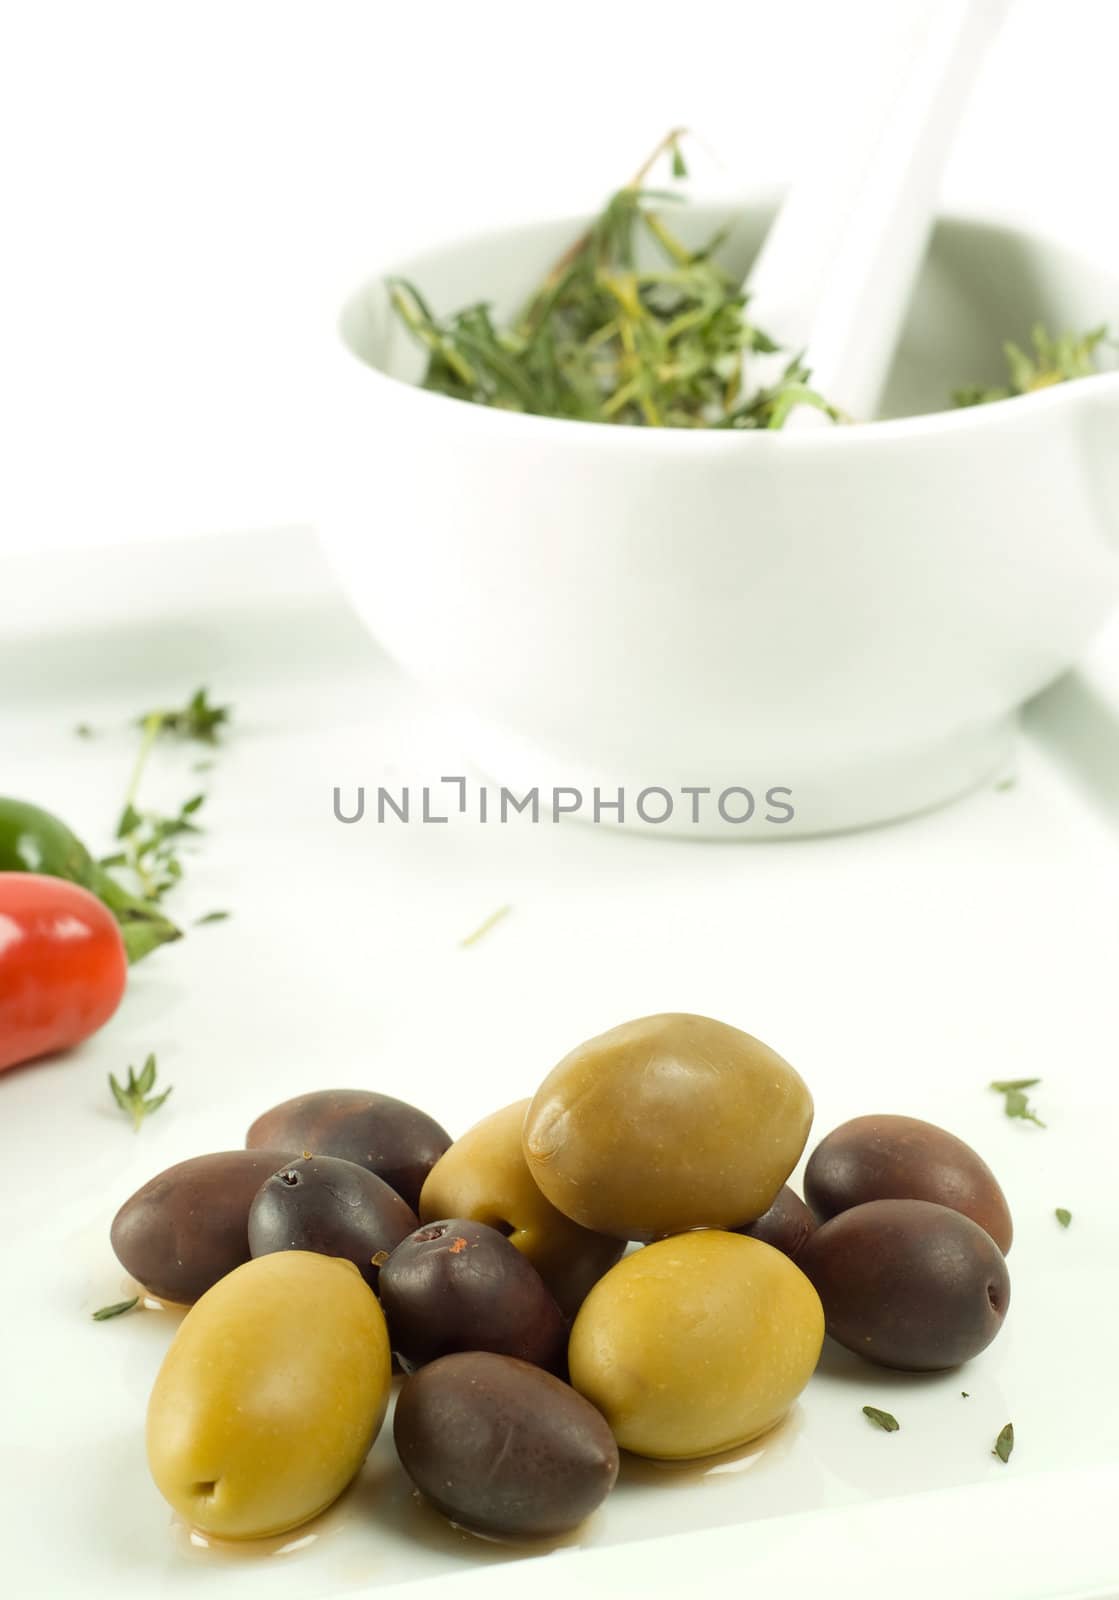 Mortar and pestle with herbs and chili or chilli vegetable food with olives on white